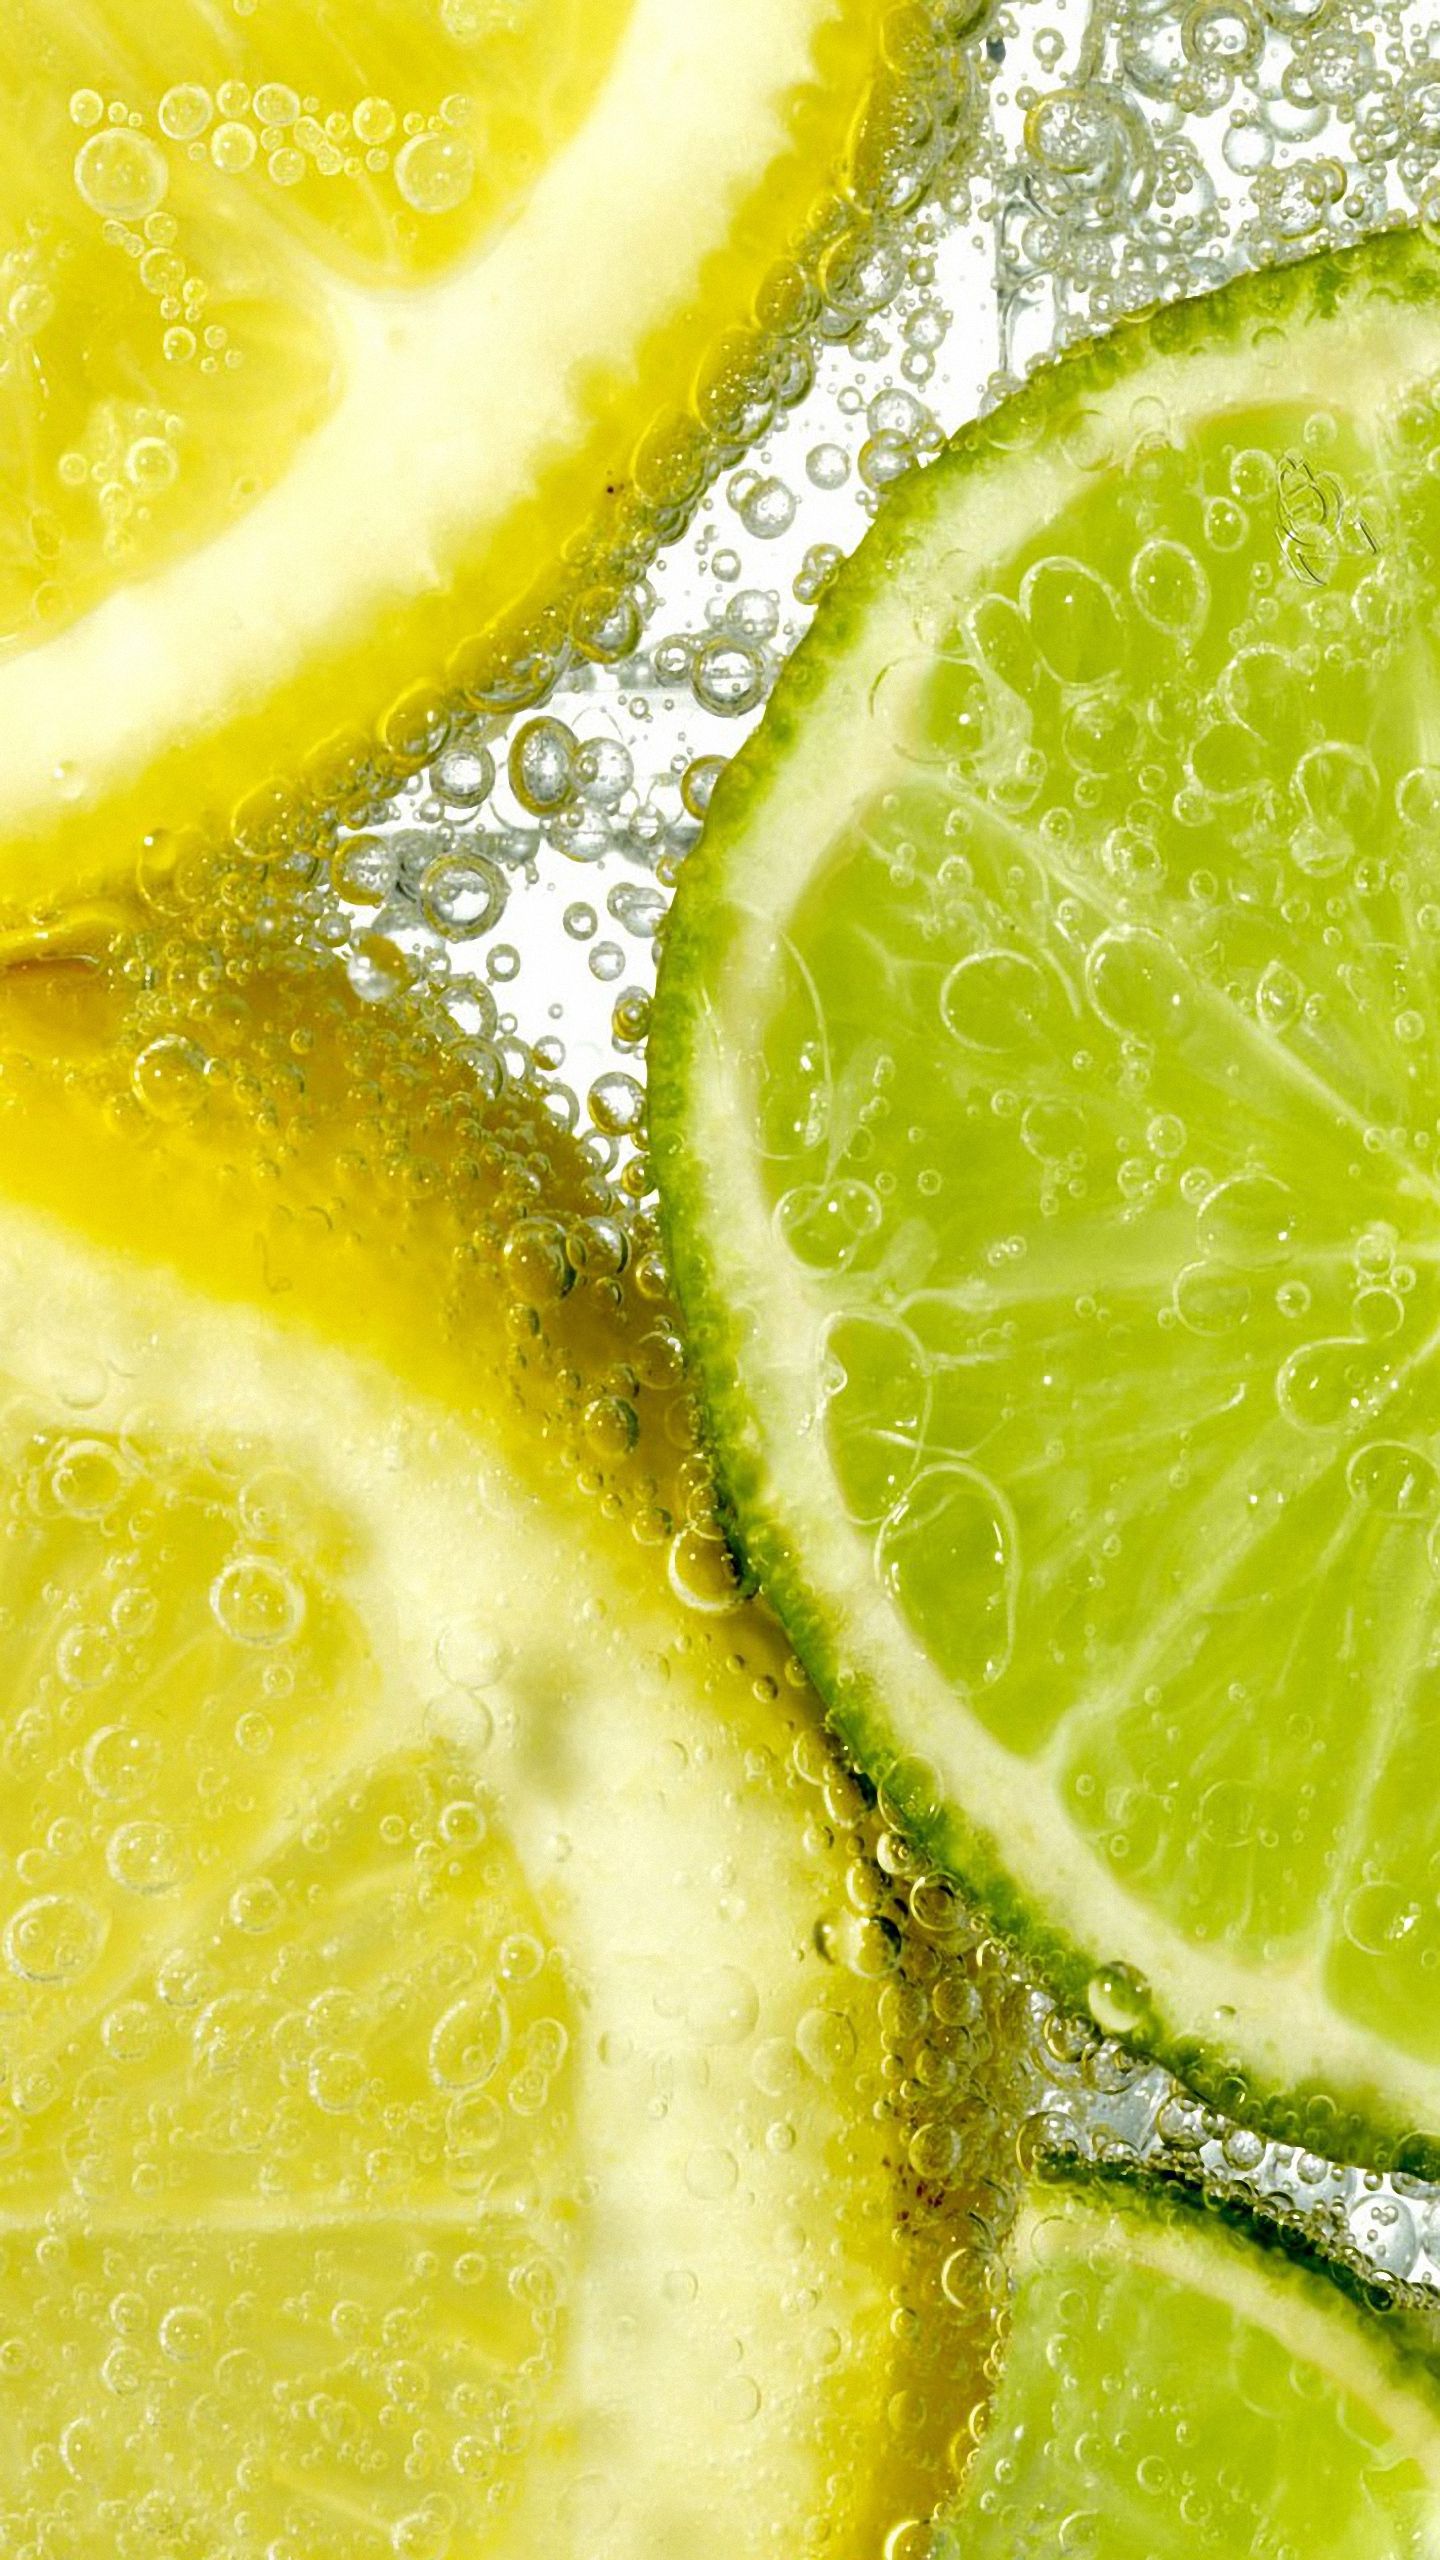 Lemon And Lime Fruit Food Galaxy S7 Wallpaper In